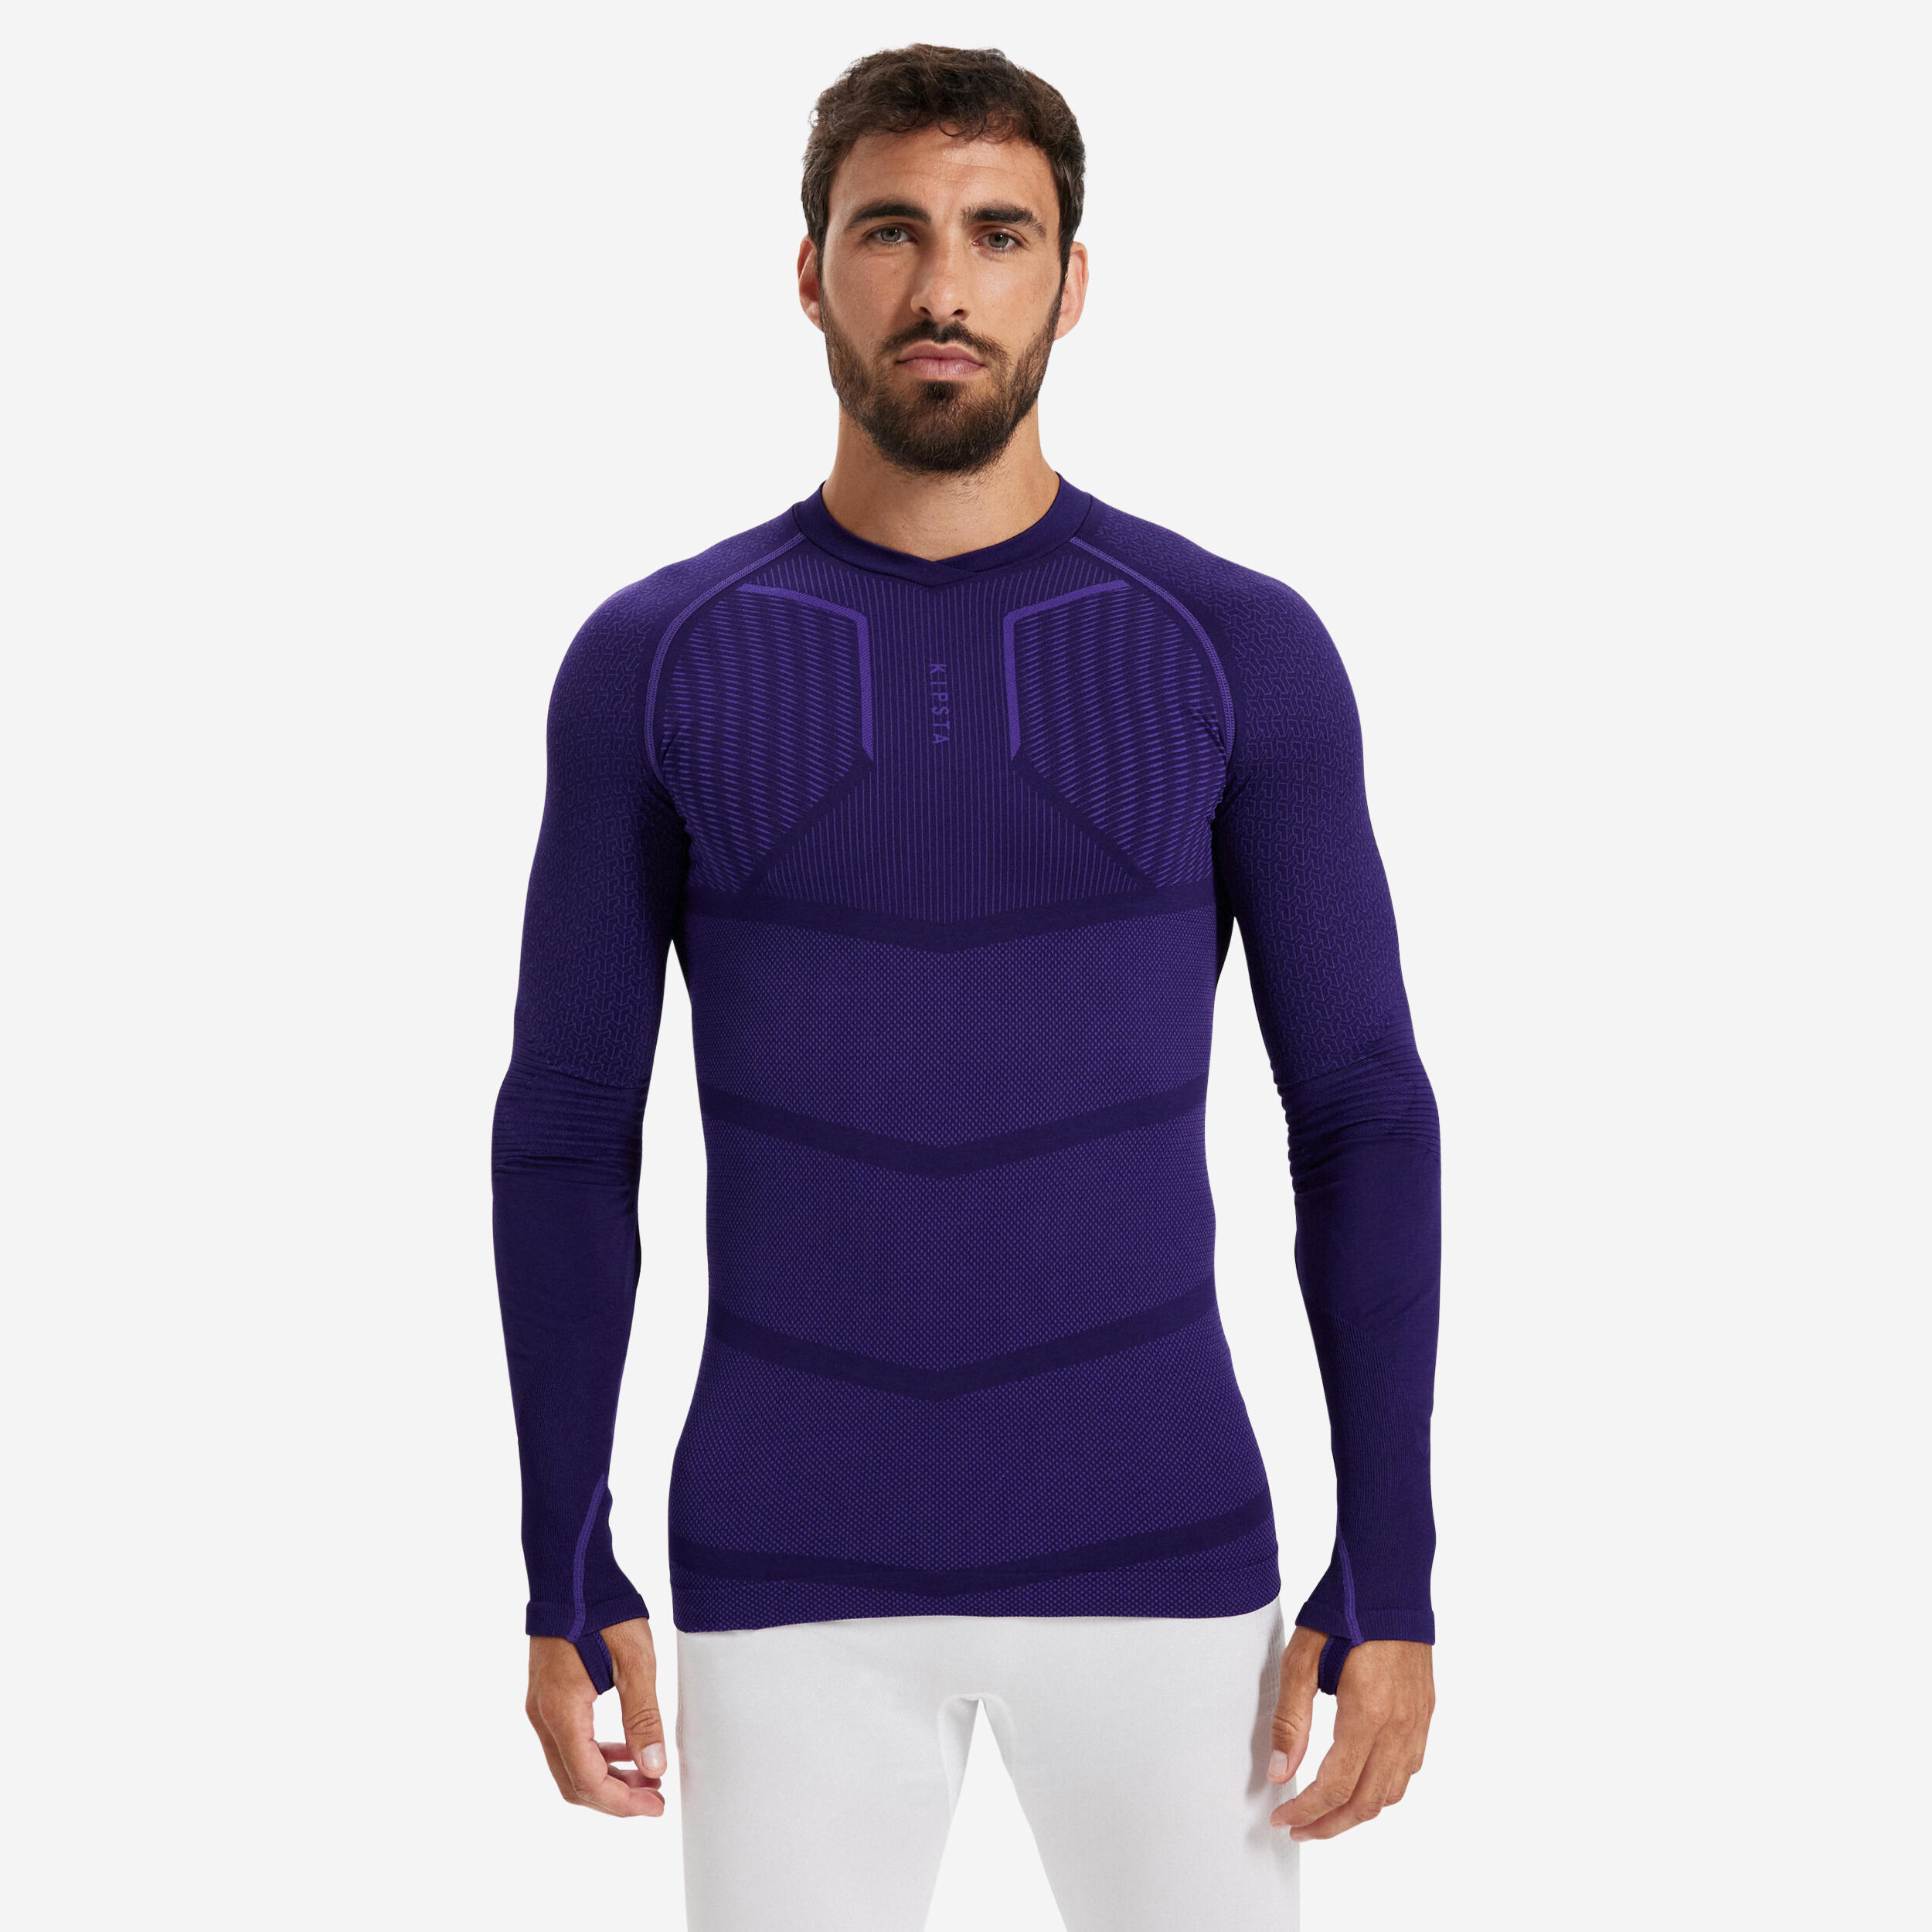 Adult Long-Sleeved Thermal Base Layer Top Keepdry 500 - Purple 1/15